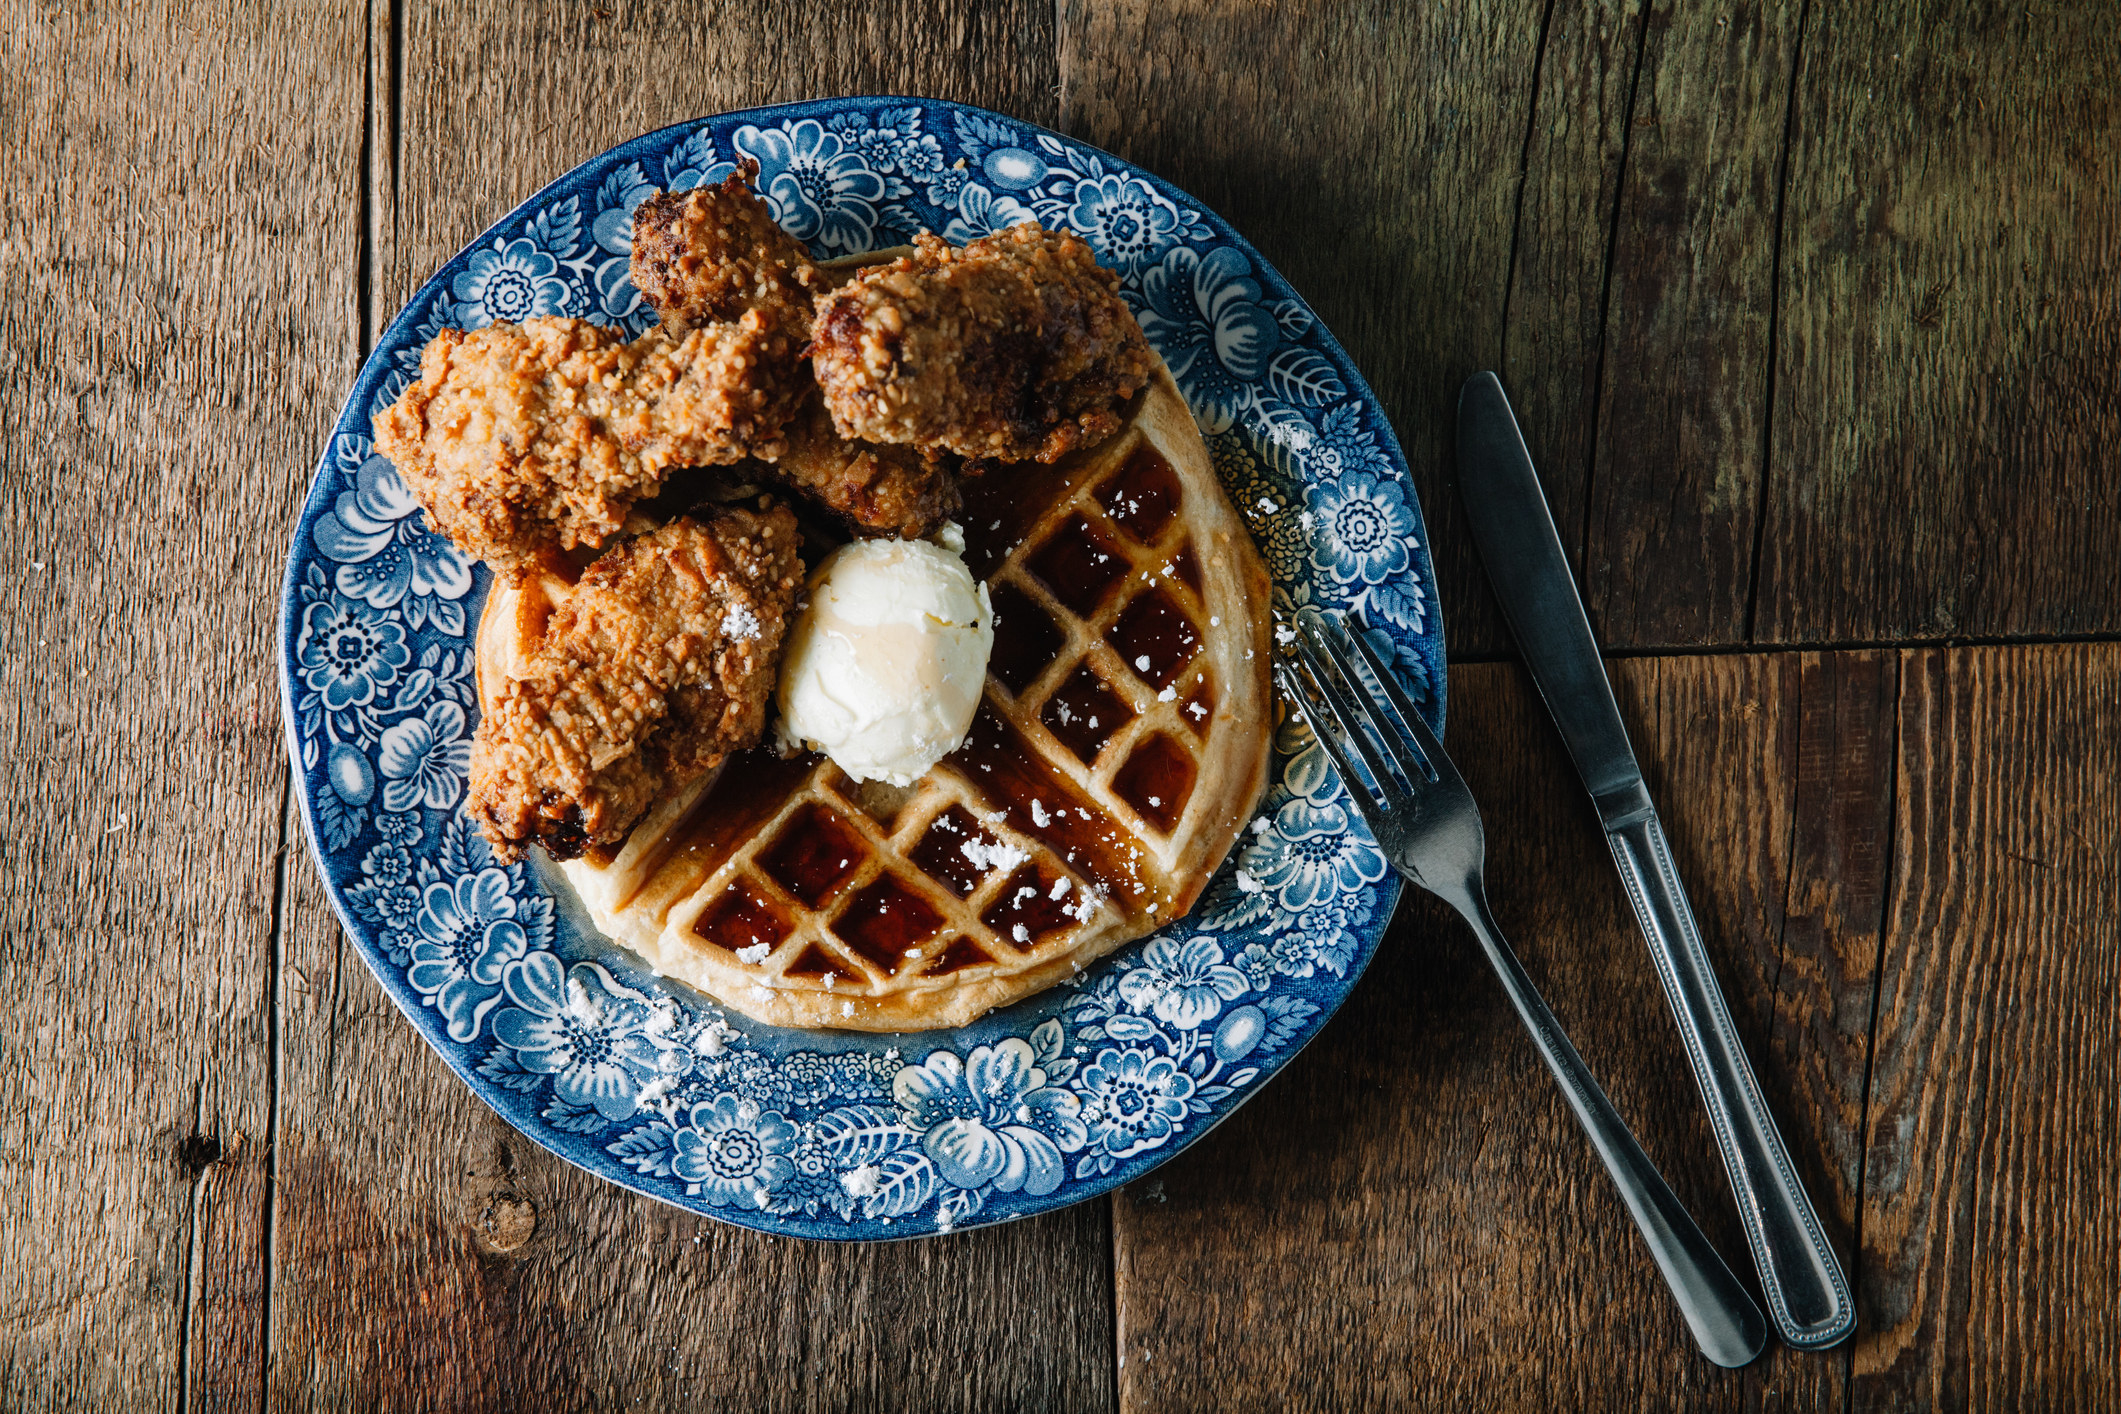 Chicken wings and waffles served with butter